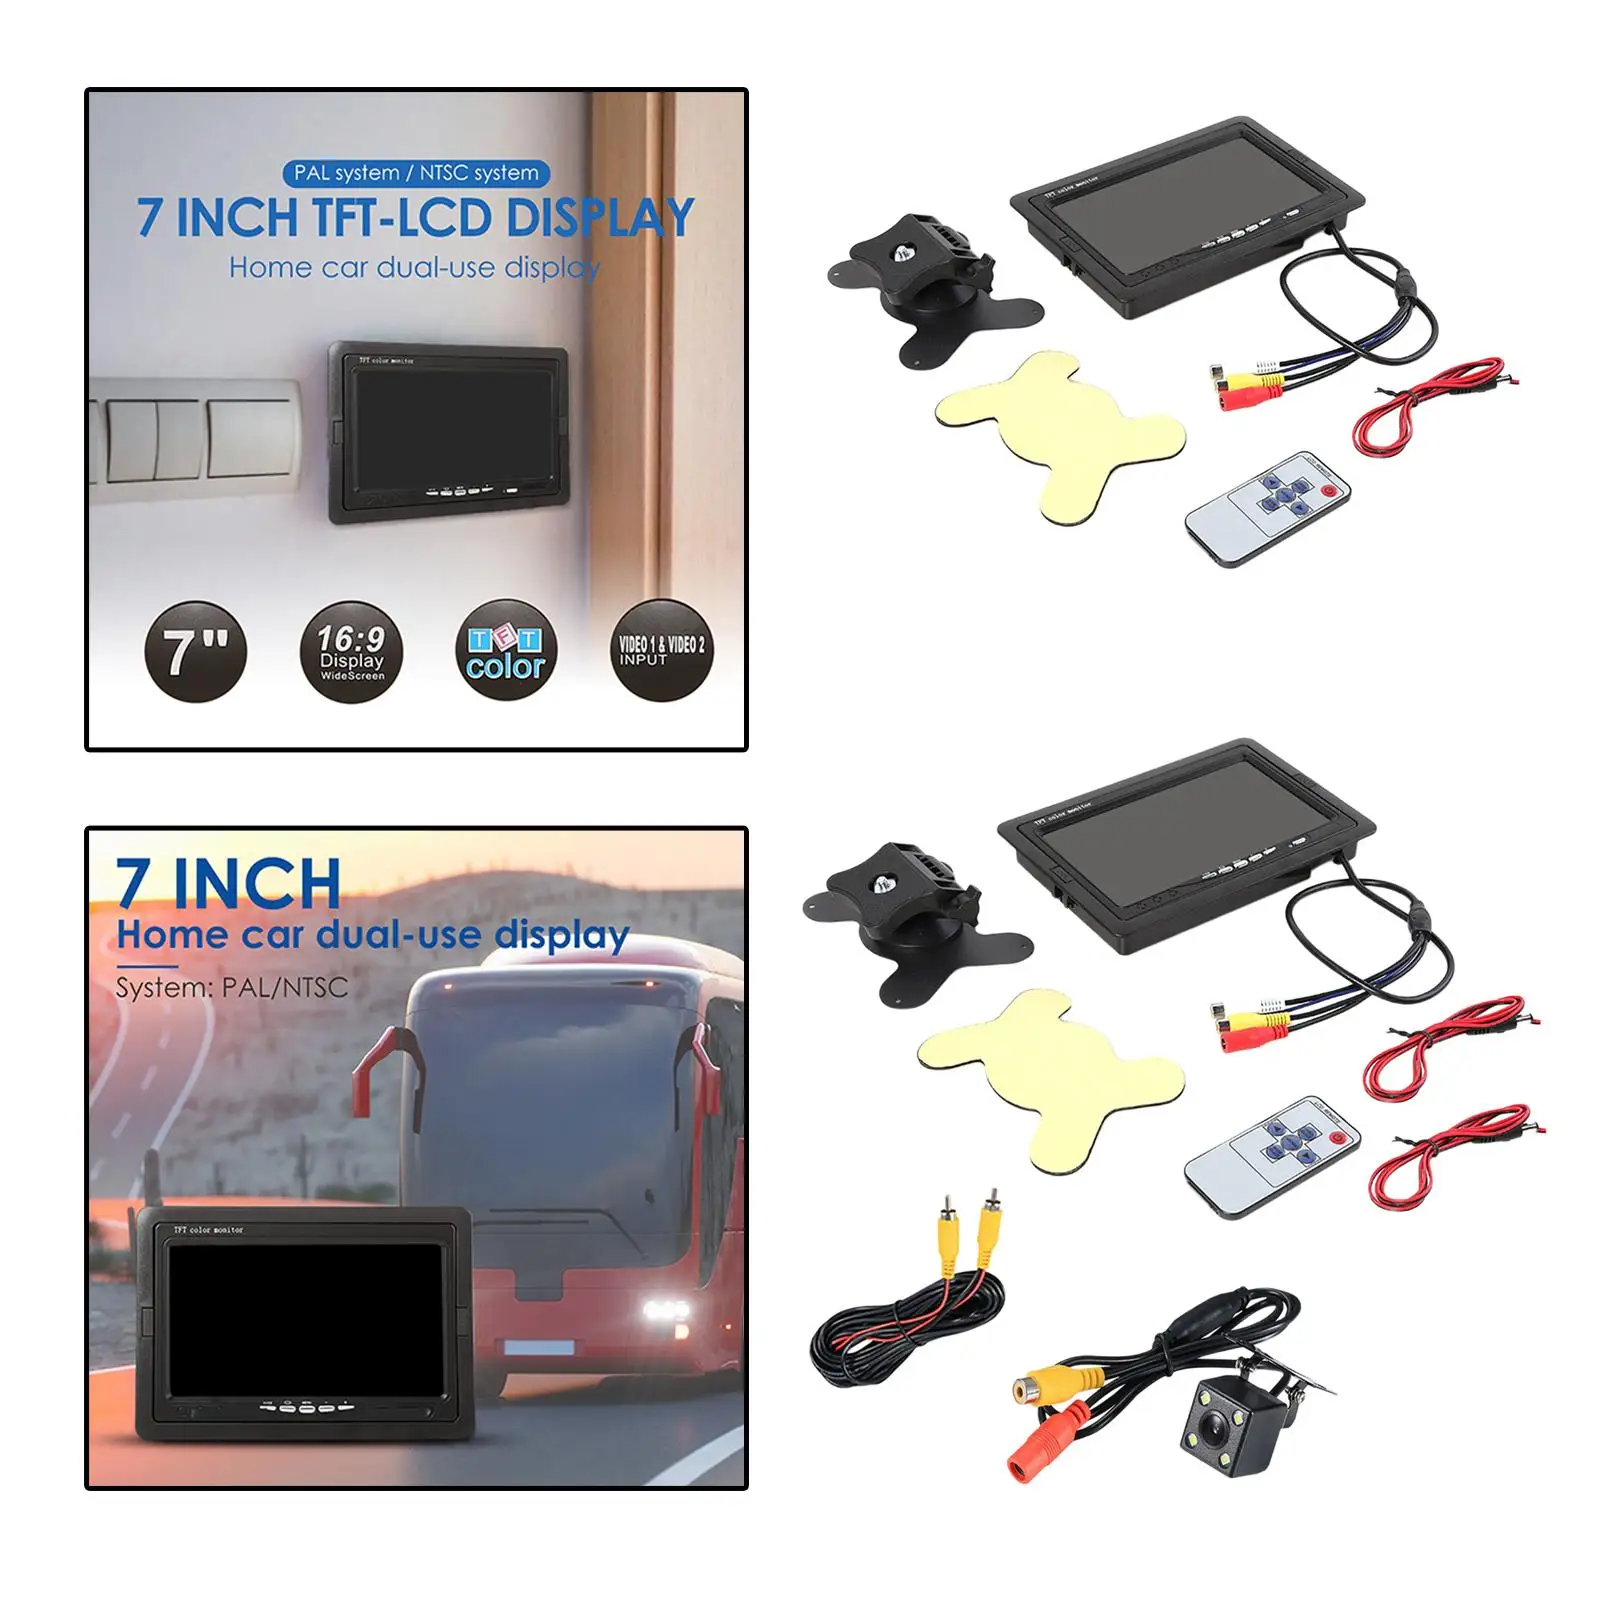 7Inches HD Car Rearview Display Monitor Set up Reverse Ntsc PaL TV DC 12V-24V Truck Portable Vehicle Parking Assist Kit